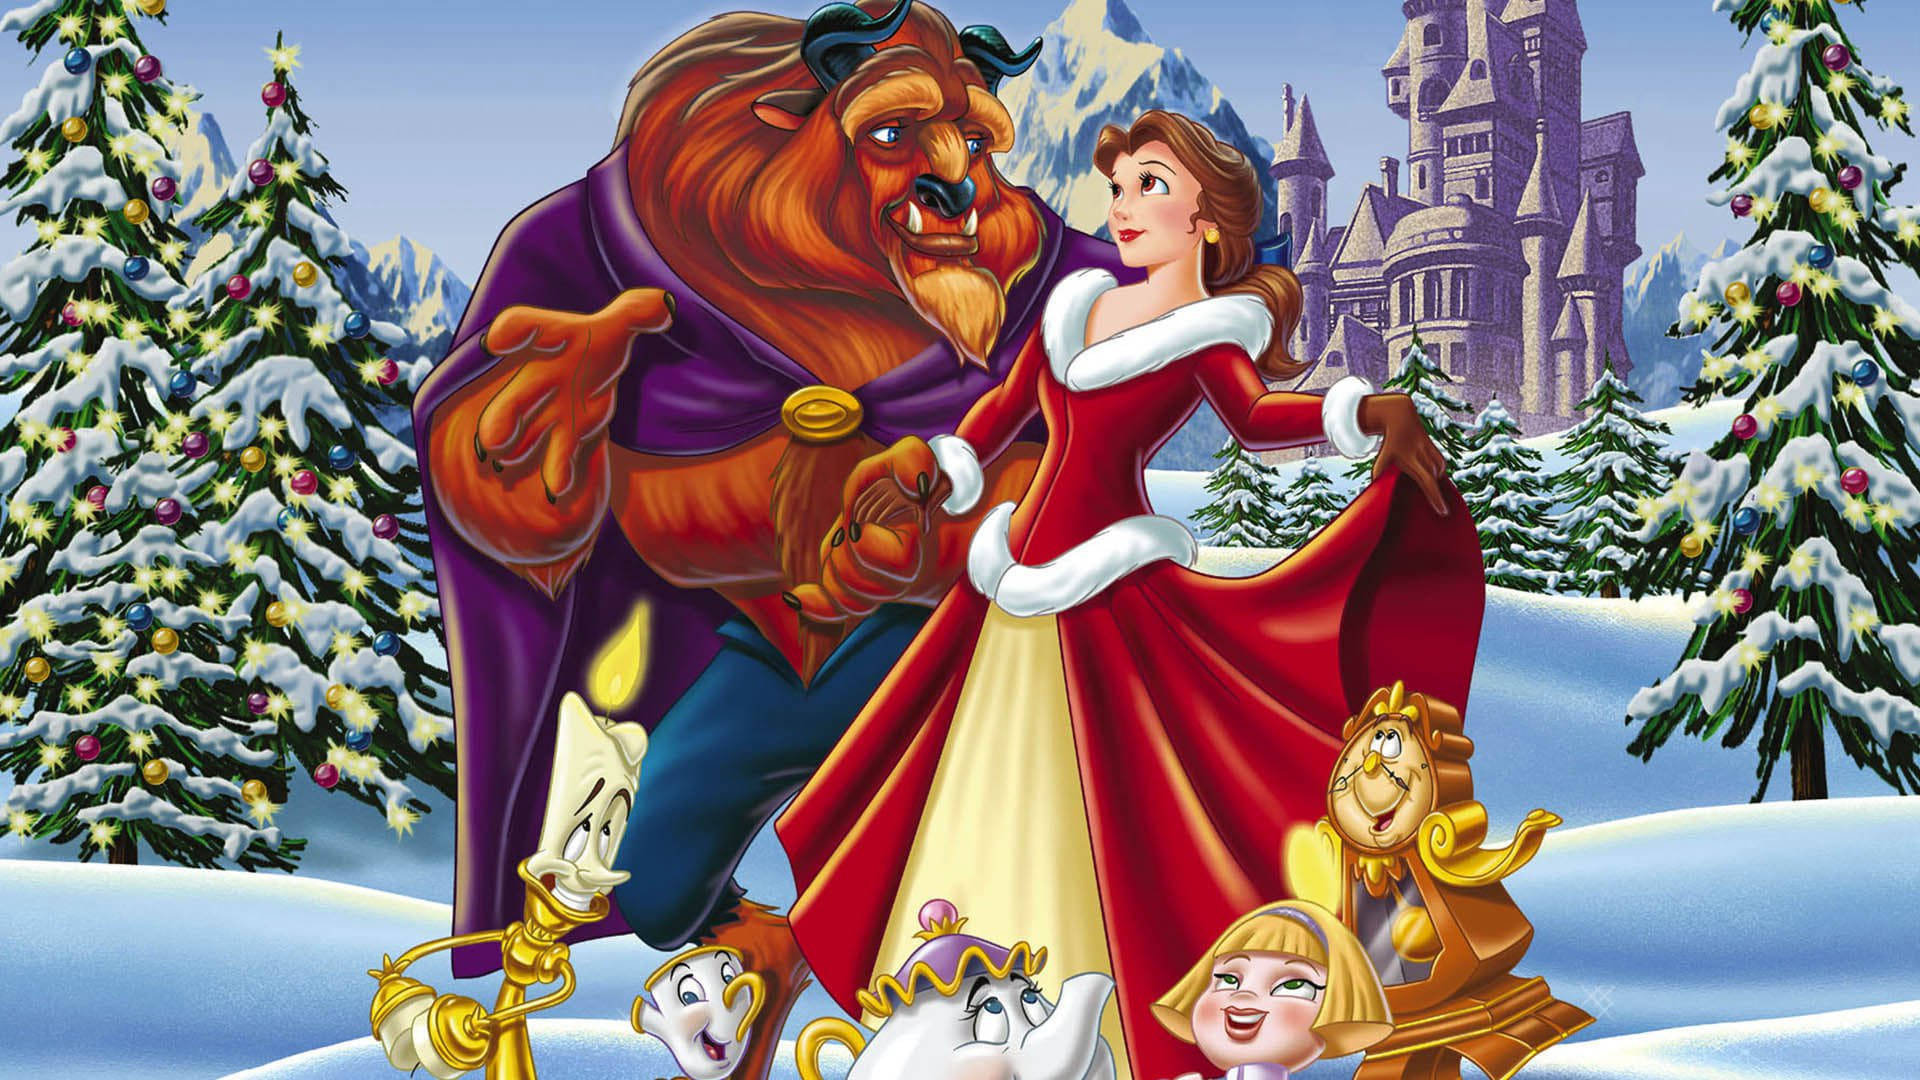 Beauty and the Beast: The Enchanted Christmas / Beauty and the Beast: The Enchanted Christmas (1997)